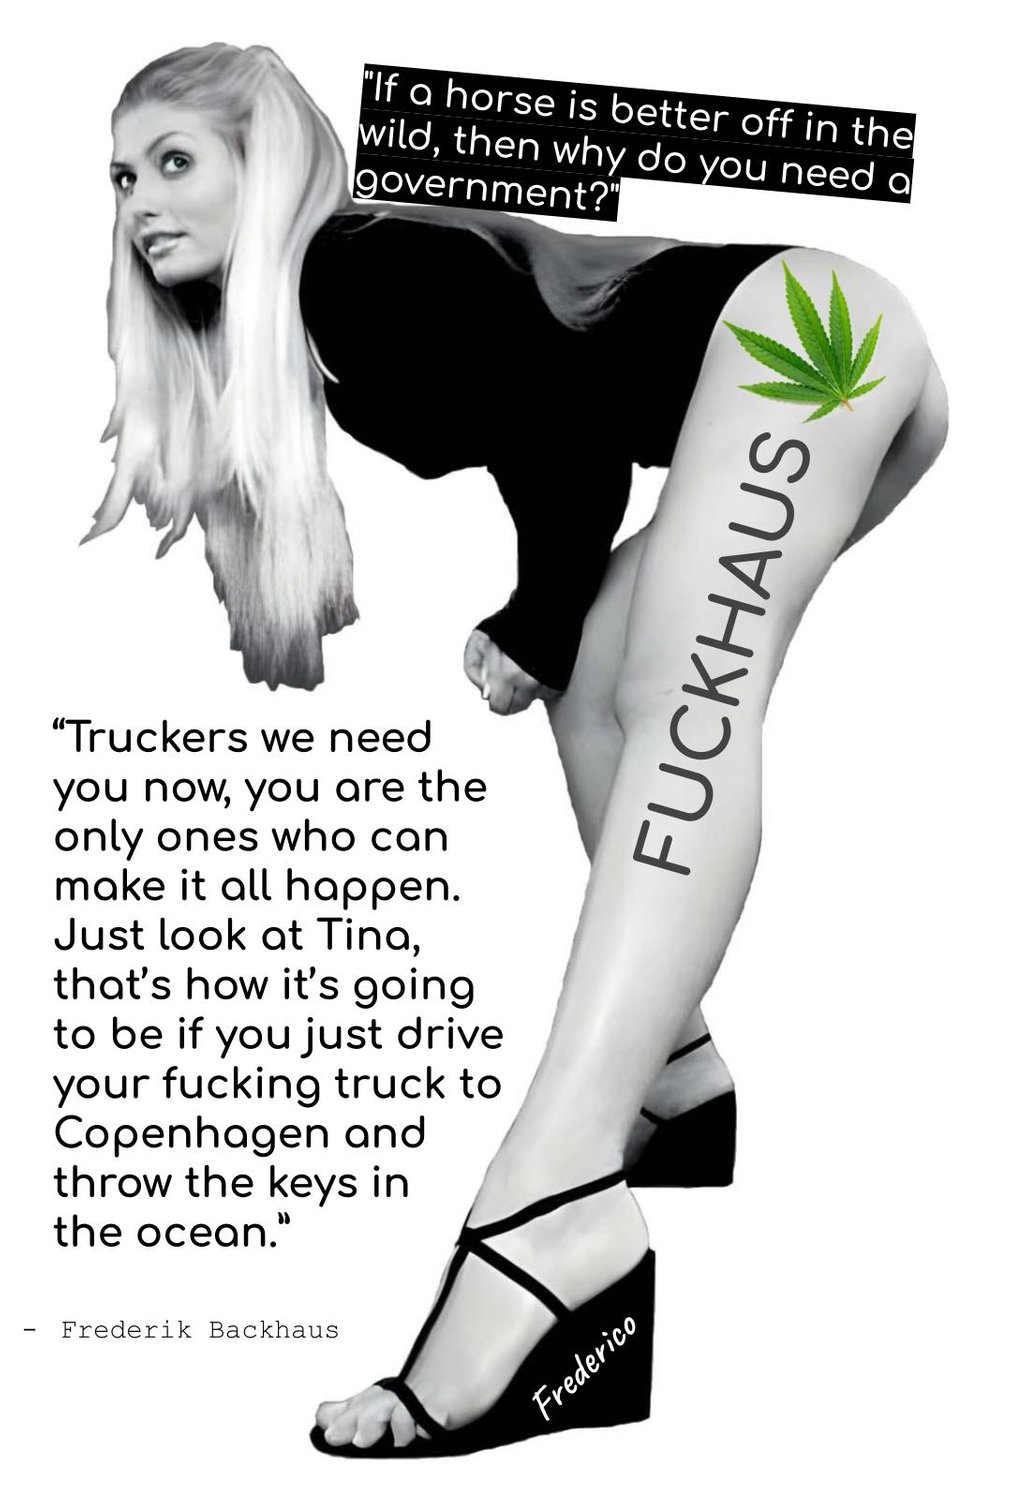 "Truckers we need you now" by Frederik Backhaus